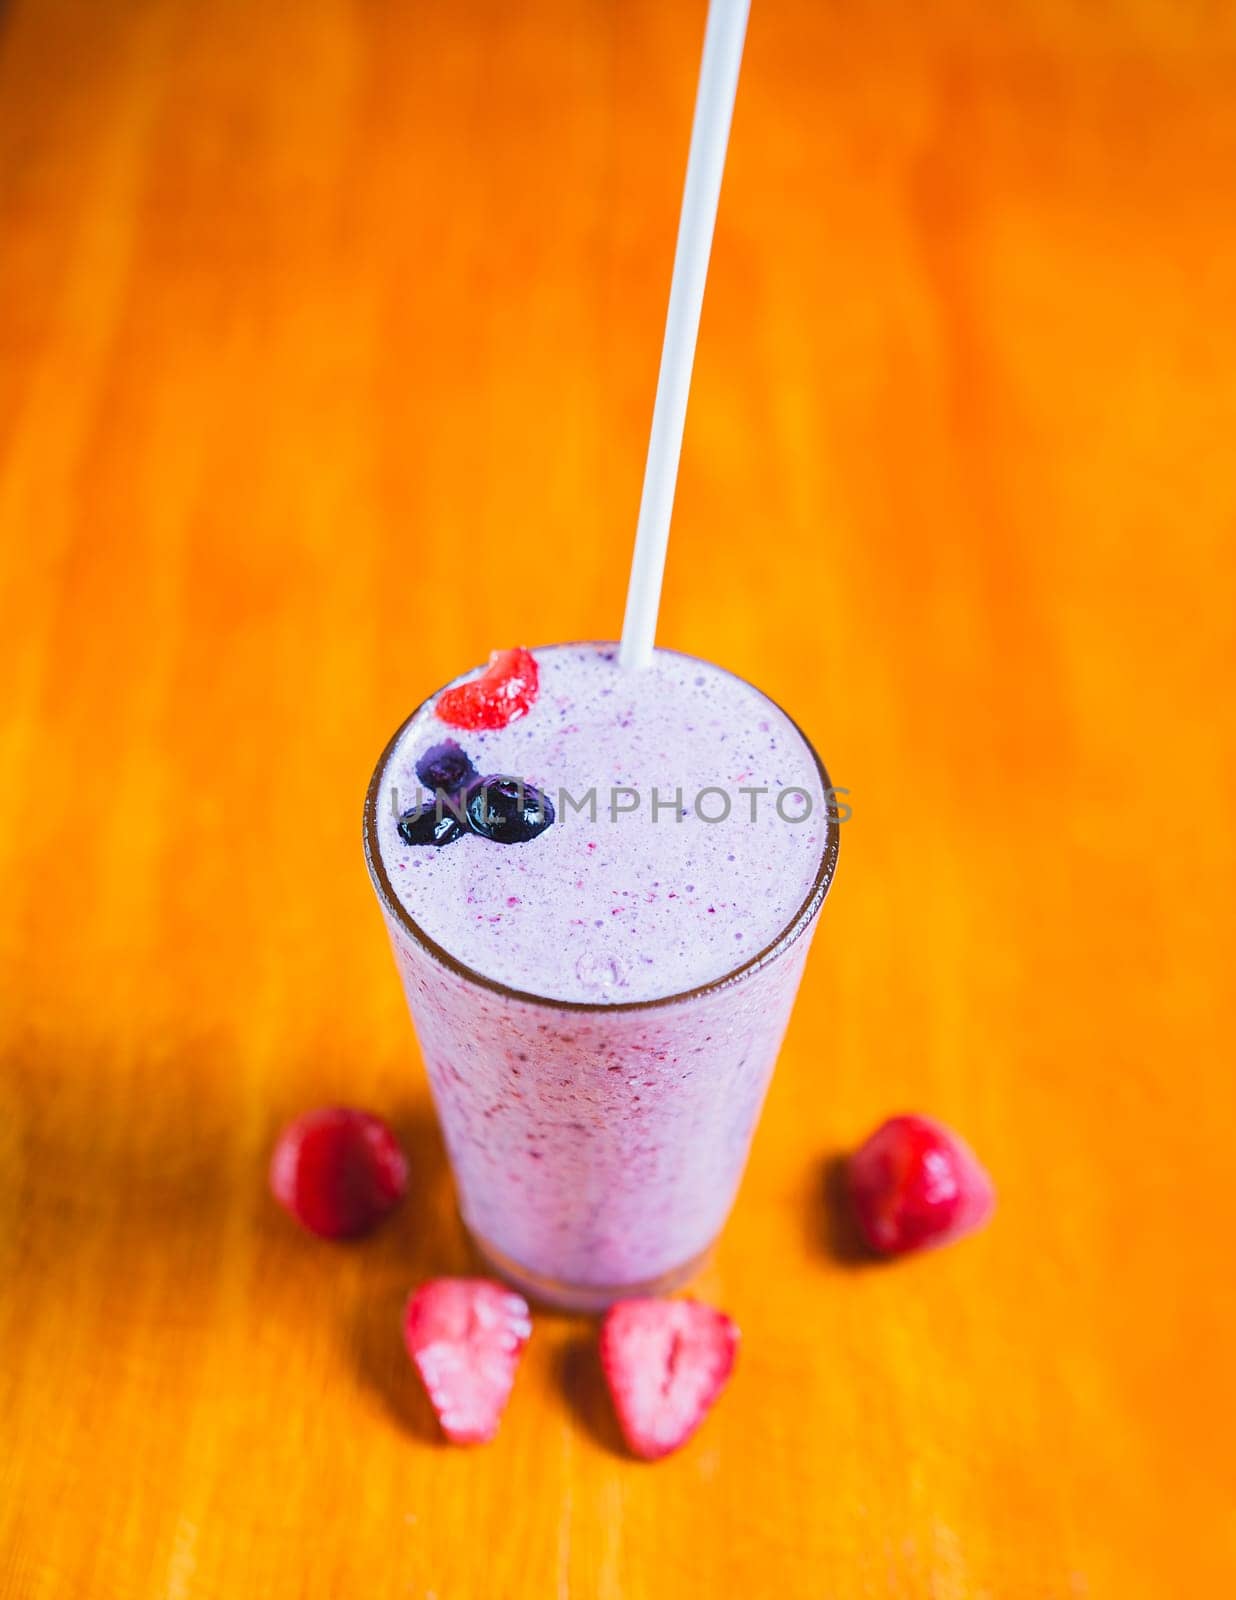 Strawberry smoothie with blueberry on wooden background. Strawberry milkshake on wooden table by isaiphoto